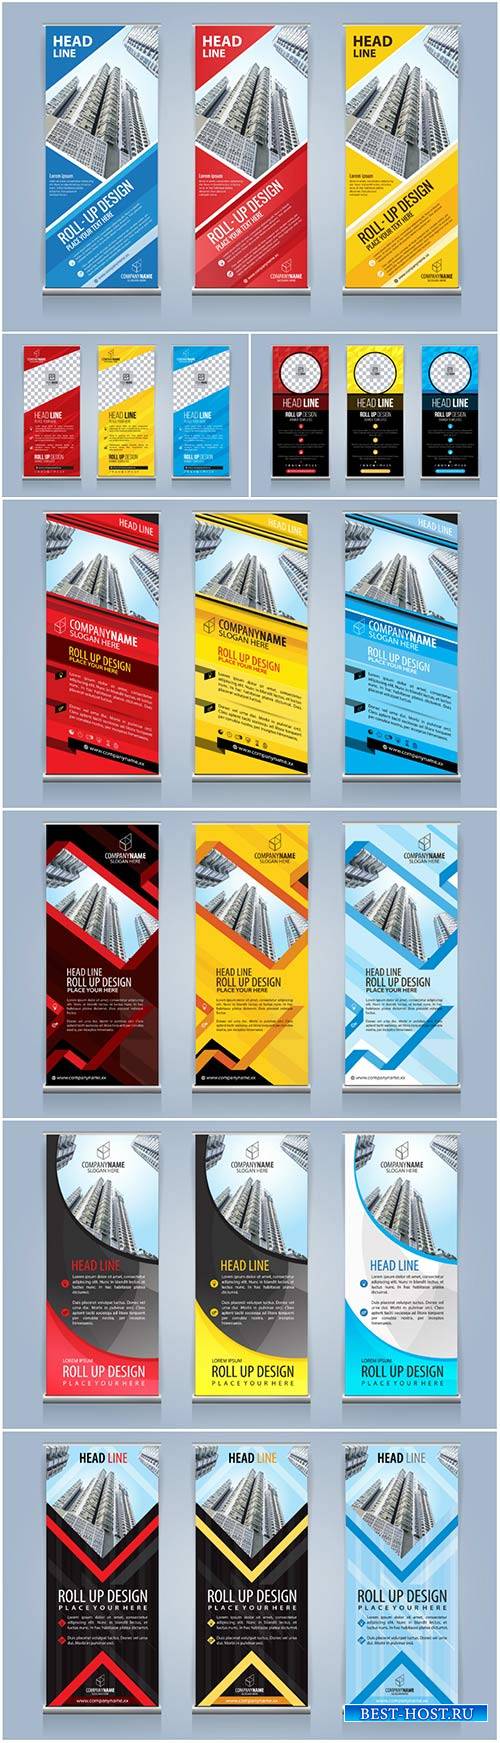 Roll up banners for web and advertisement print out, vector flyer handout d ...